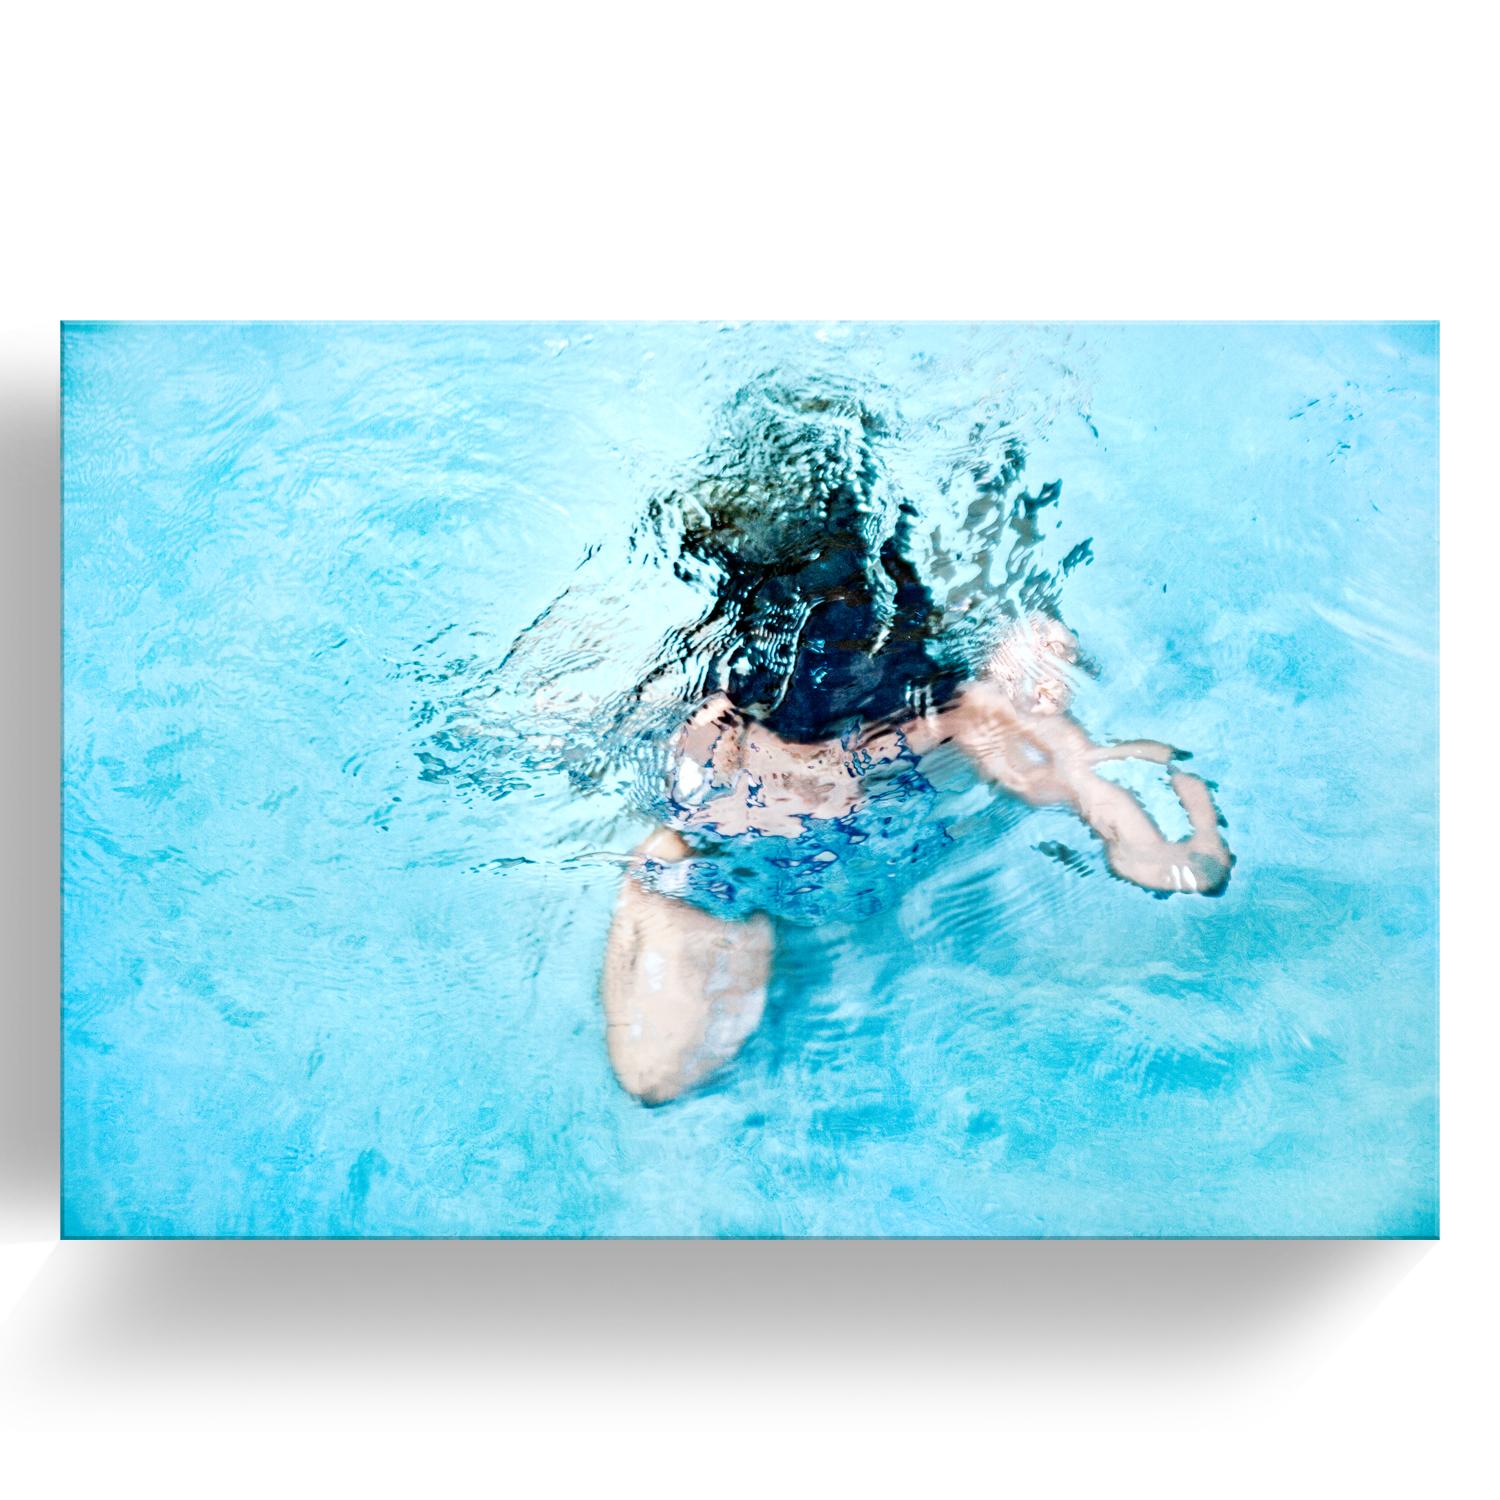 'Submerge V' Mounted Plexiglass Limited Edition Photograph features a female figure underwater in bright reflective tones of blue, beige, and black. Inspired by nature and human connectivity, the intimacy behind her work is evident. Renowned and